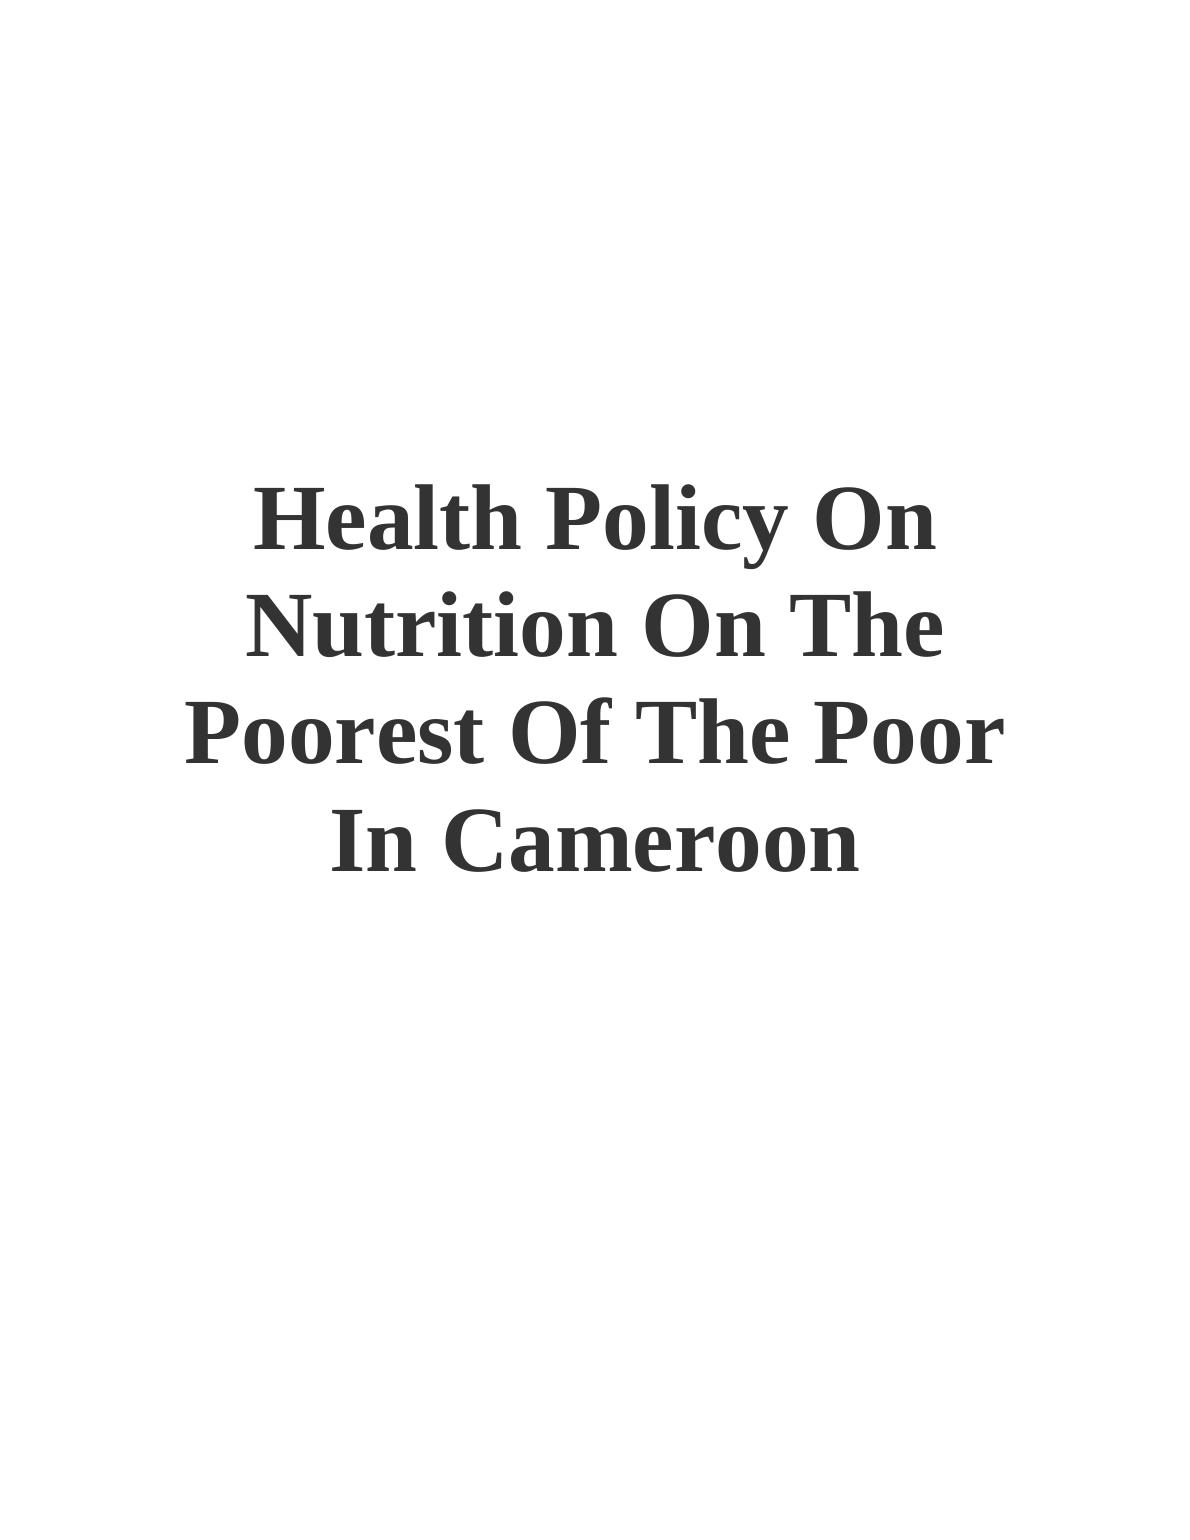 Poverty and Malnutrition in Cameroon_1